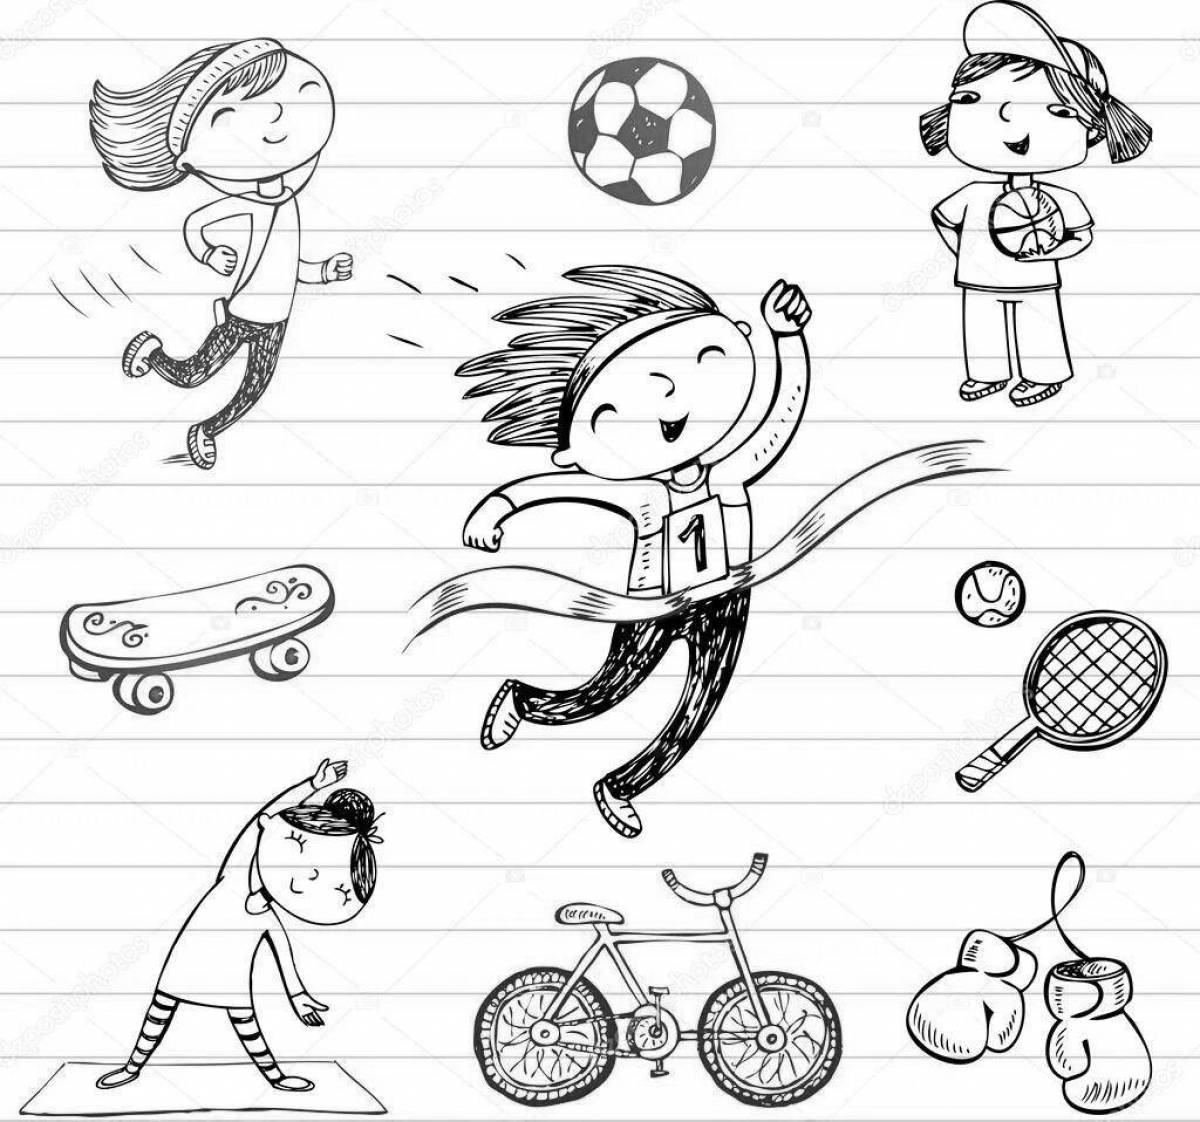 About sports and healthy lifestyle for children #2